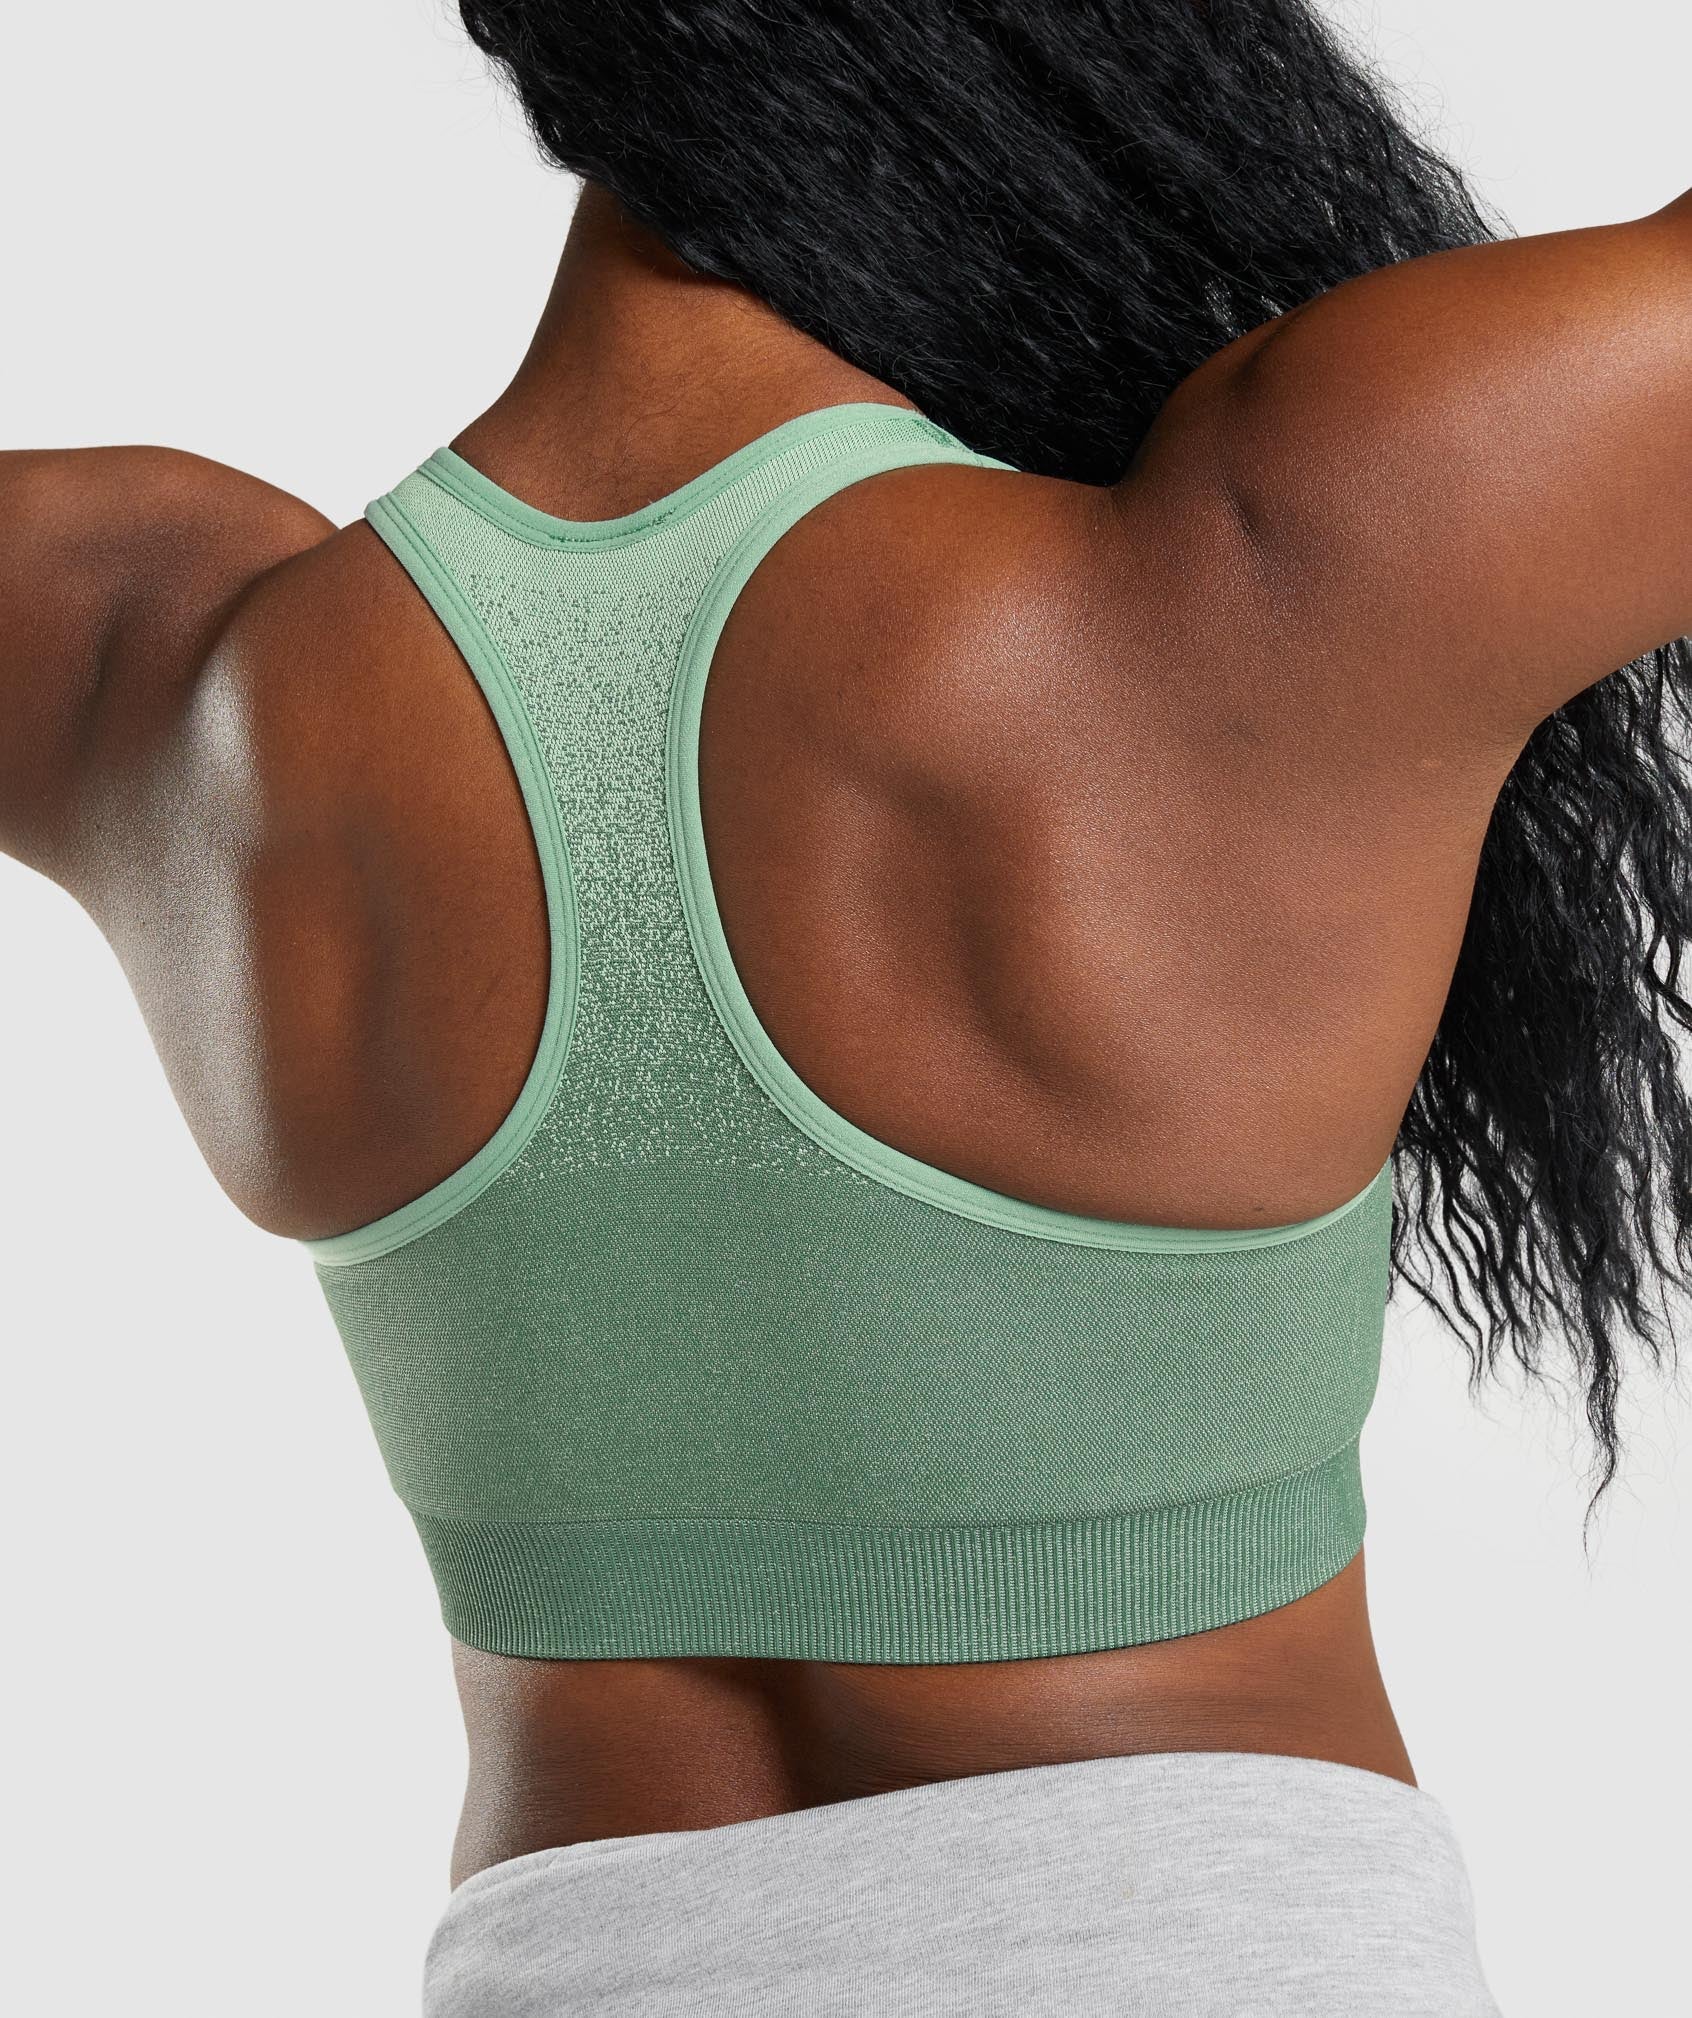 Adapt Ombre Seamless Sports Bra in Green/Light Green - view 5